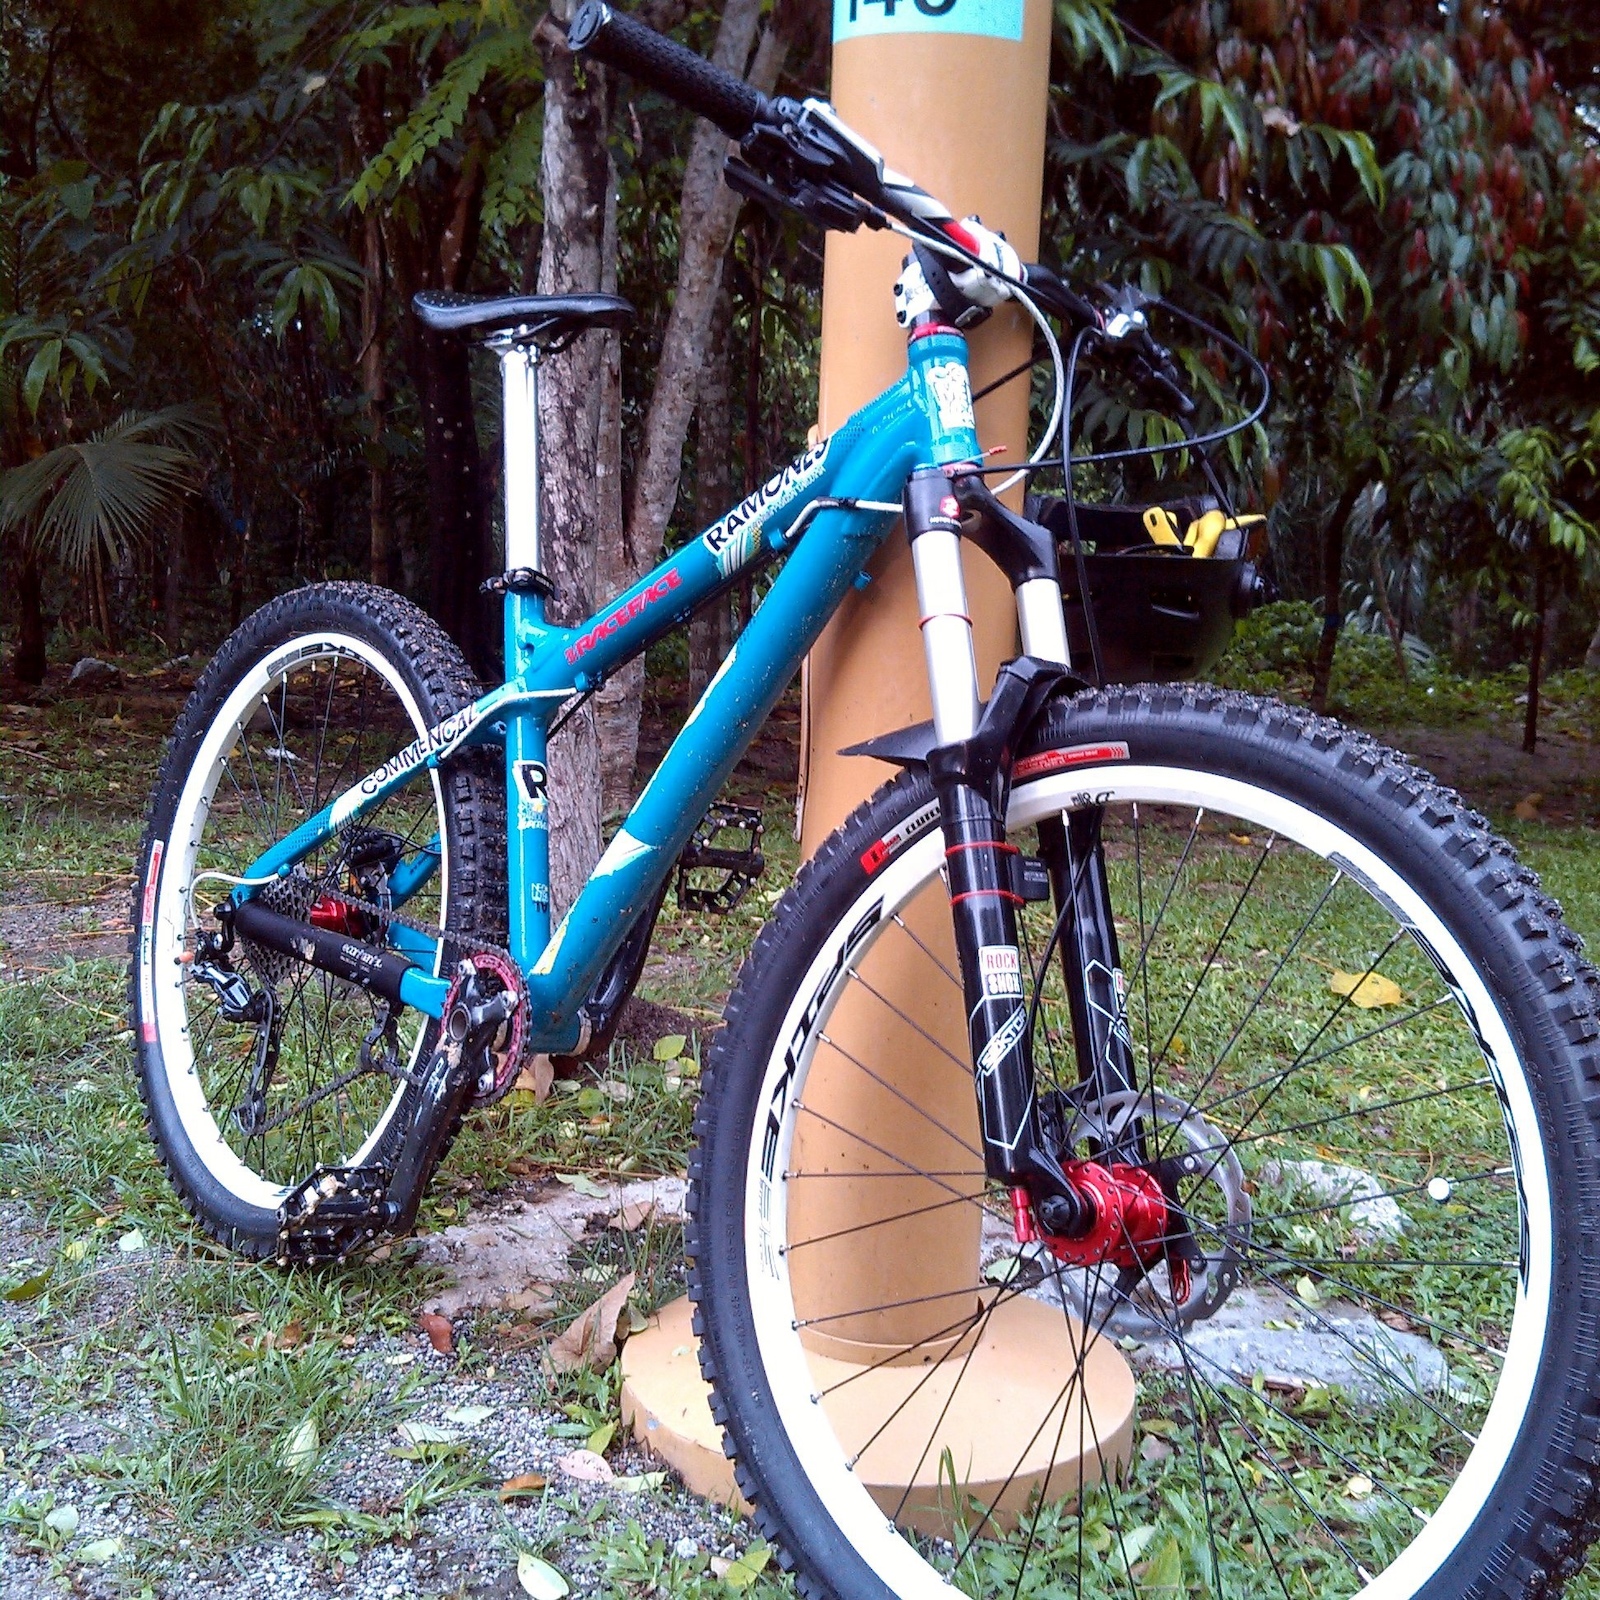 Commencal Ramones 2010
140MM Sektor
2.3 specialized sx
raceface narrow wide single speed
deore brakes(ice tech)
deore 10 speed